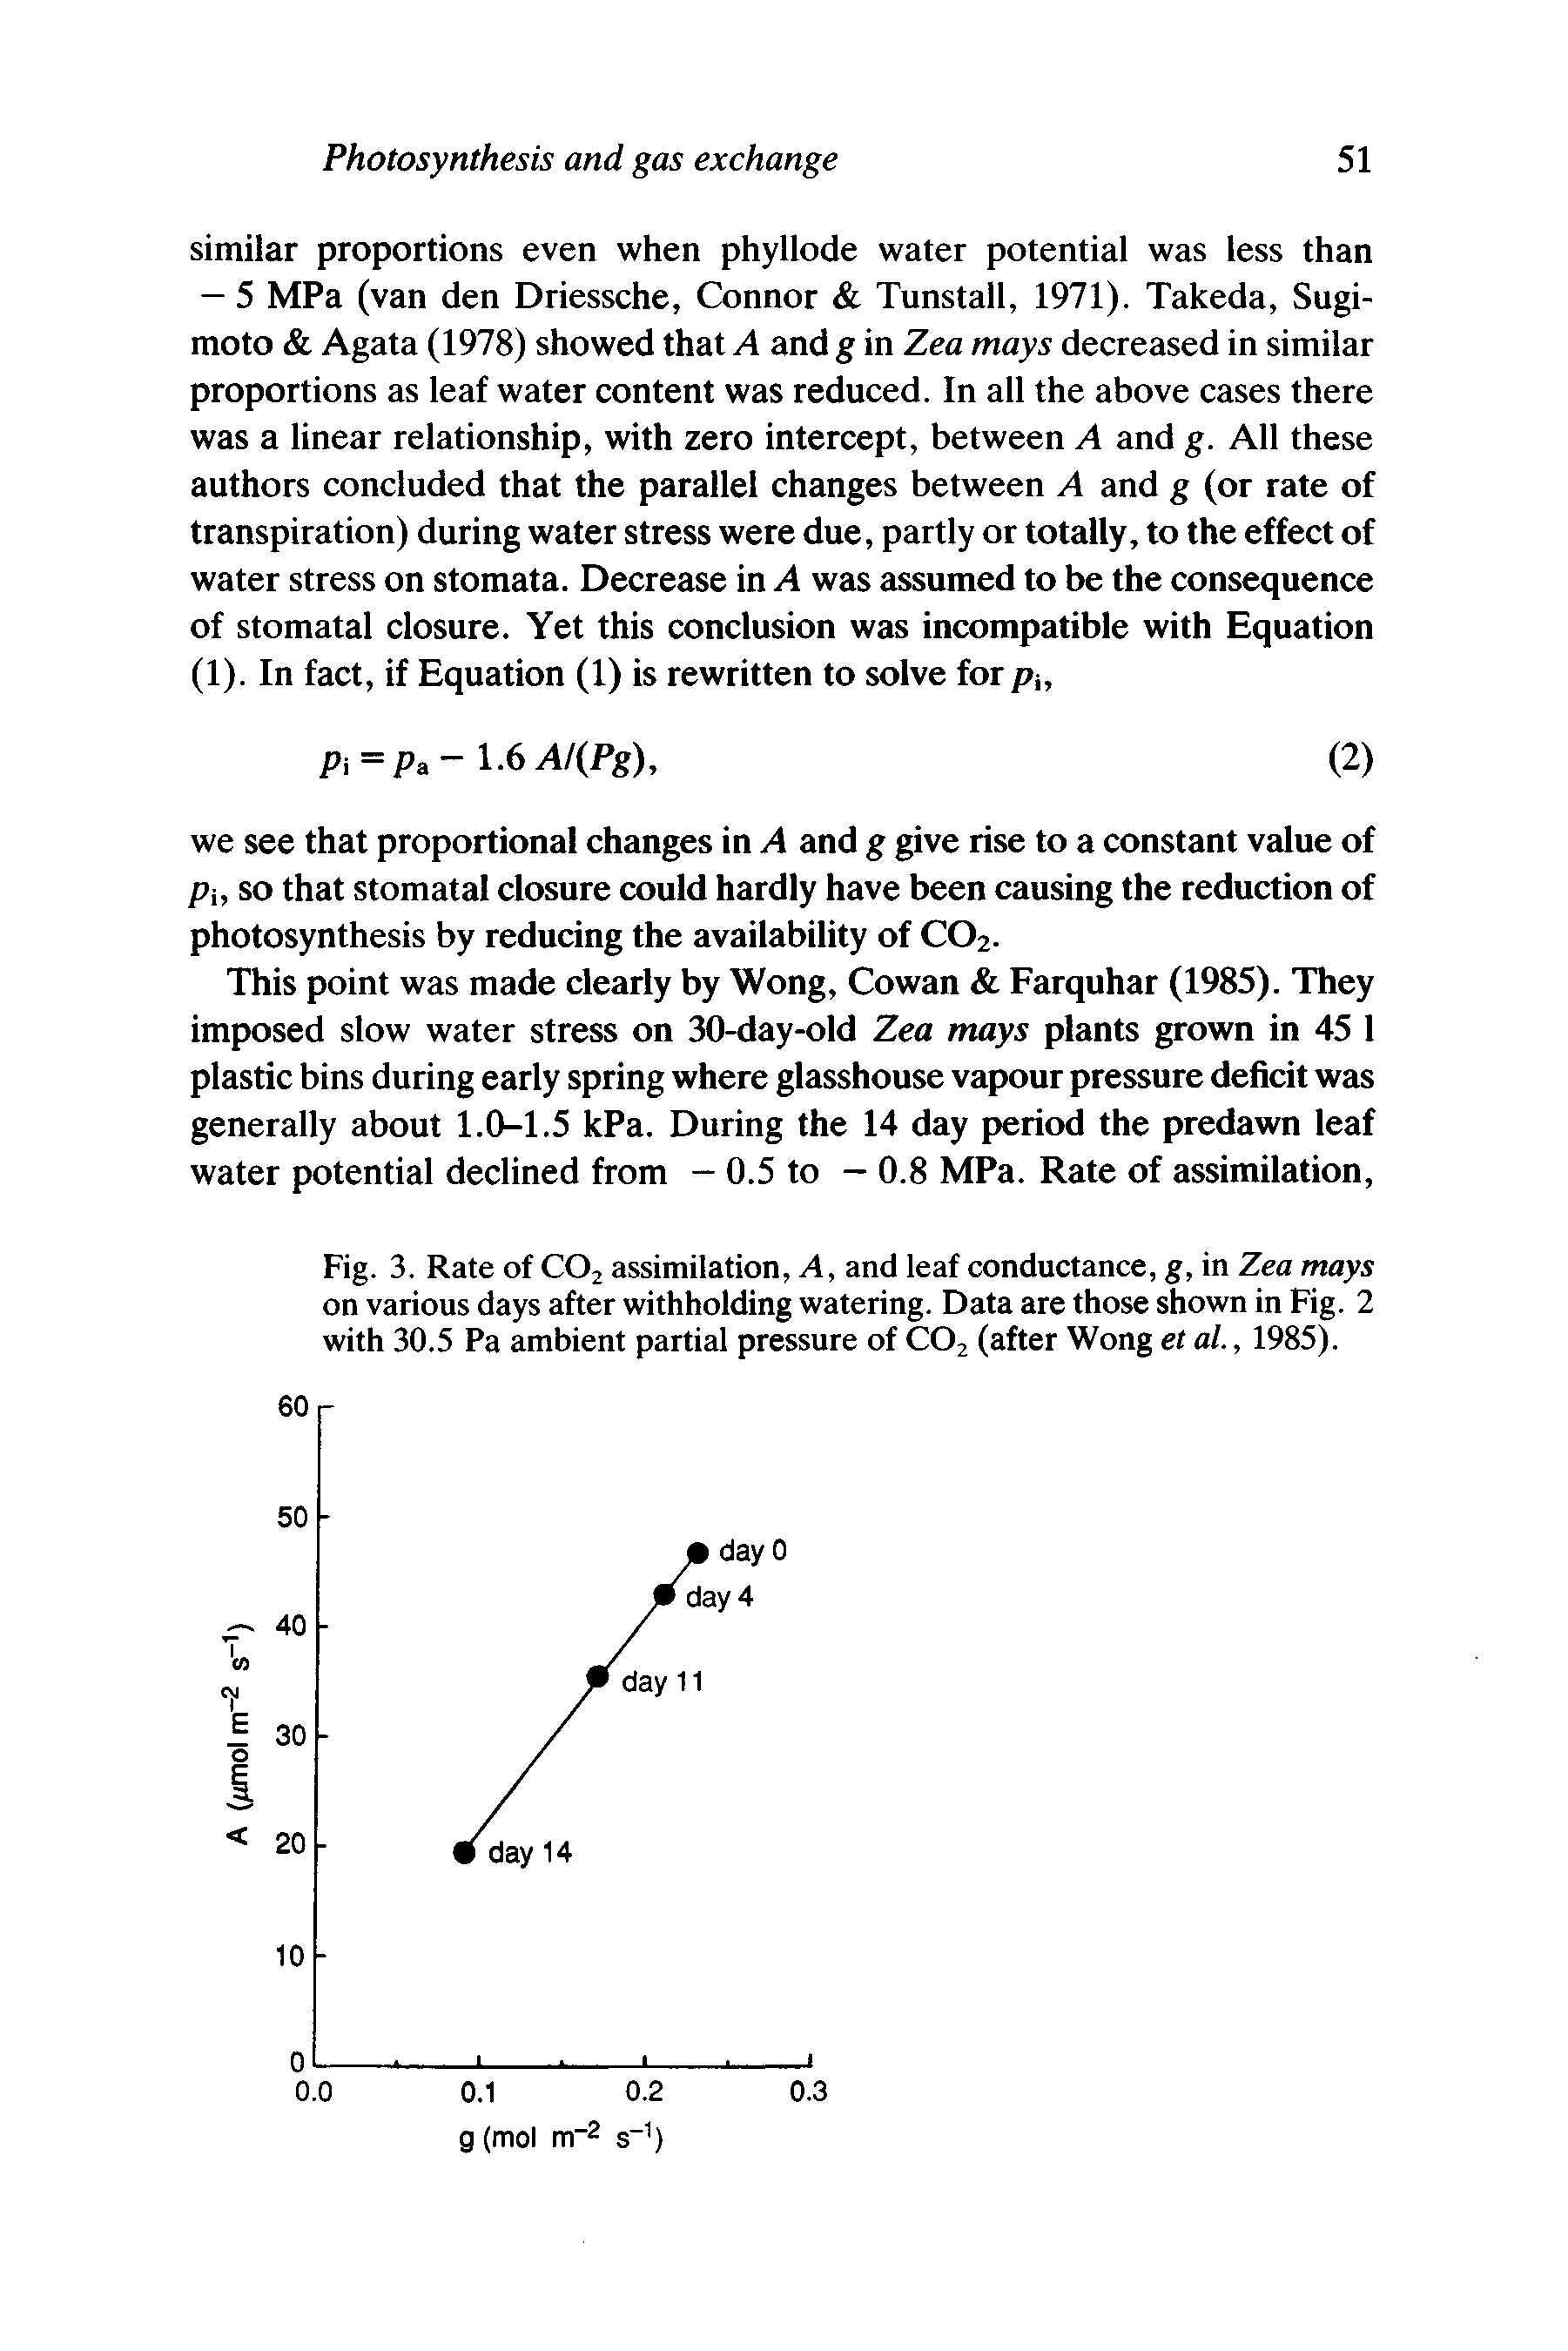 Fig. 3. Rate of CO2 assimilation. A, and leaf conductance, g, in Zea mays on various days after withholding watering. Data are those shown in Fig. 2 with 30.5 Pa ambient partial pressure of CO2 (after Wong et al., 1985).